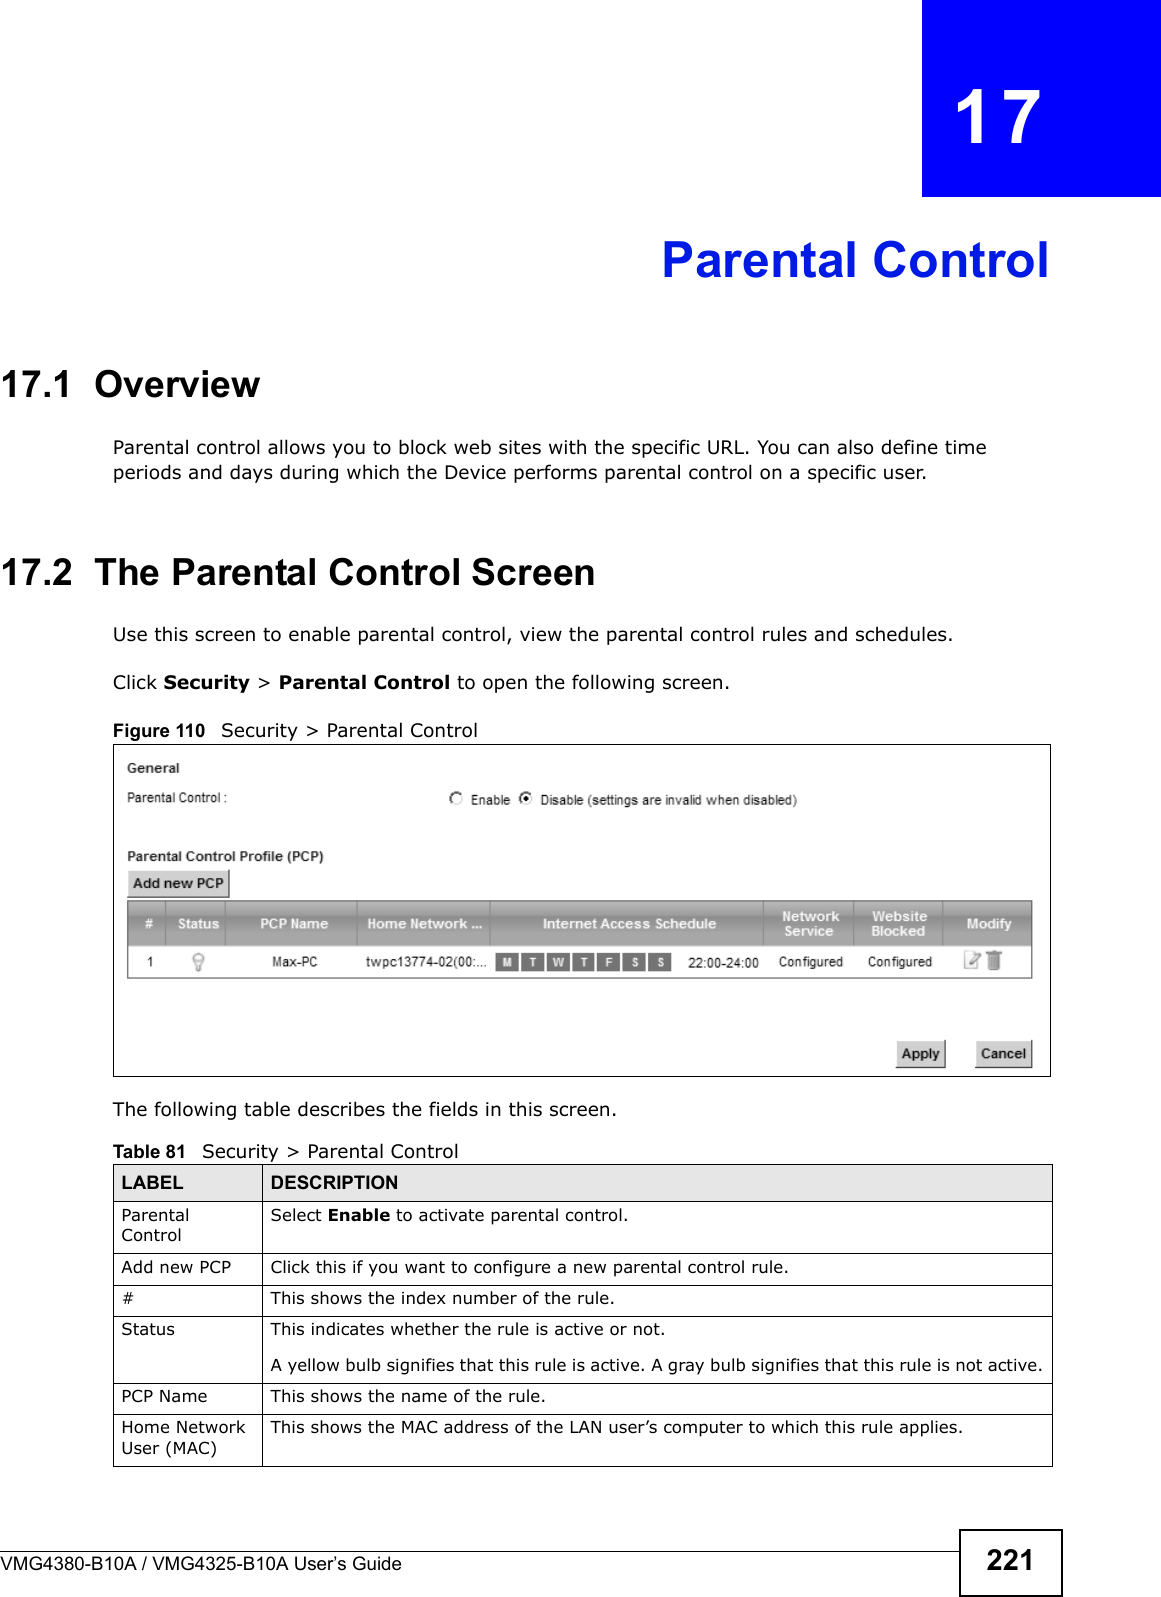 VMG4380-B10A / VMG4325-B10A User’s Guide 221CHAPTER  17Parental Control17.1  OverviewParental control allows you to block web sites with the specific URL. You can also define time periods and days during which the Device performs parental control on a specific user. 17.2  The Parental Control ScreenUse this screen to enable parental control, view the parental control rules and schedules.Click Security &gt; Parental Control to open the following screen. Figure 110  Security &gt; Parental Control The following table describes the fields in this screen. Table 81   Security &gt; Parental ControlLABEL DESCRIPTIONParentalControlSelect Enable to activate parental control.Add new PCP Click this if you want to configure a new parental control rule.# This shows the index number of the rule.Status This indicates whether the rule is active or not.A yellow bulb signifies that this rule is active. A gray bulb signifies that this rule is not active.PCP Name This shows the name of the rule.Home NetworkUser (MAC)This shows the MAC address of the LAN user’s computer to which this rule applies.